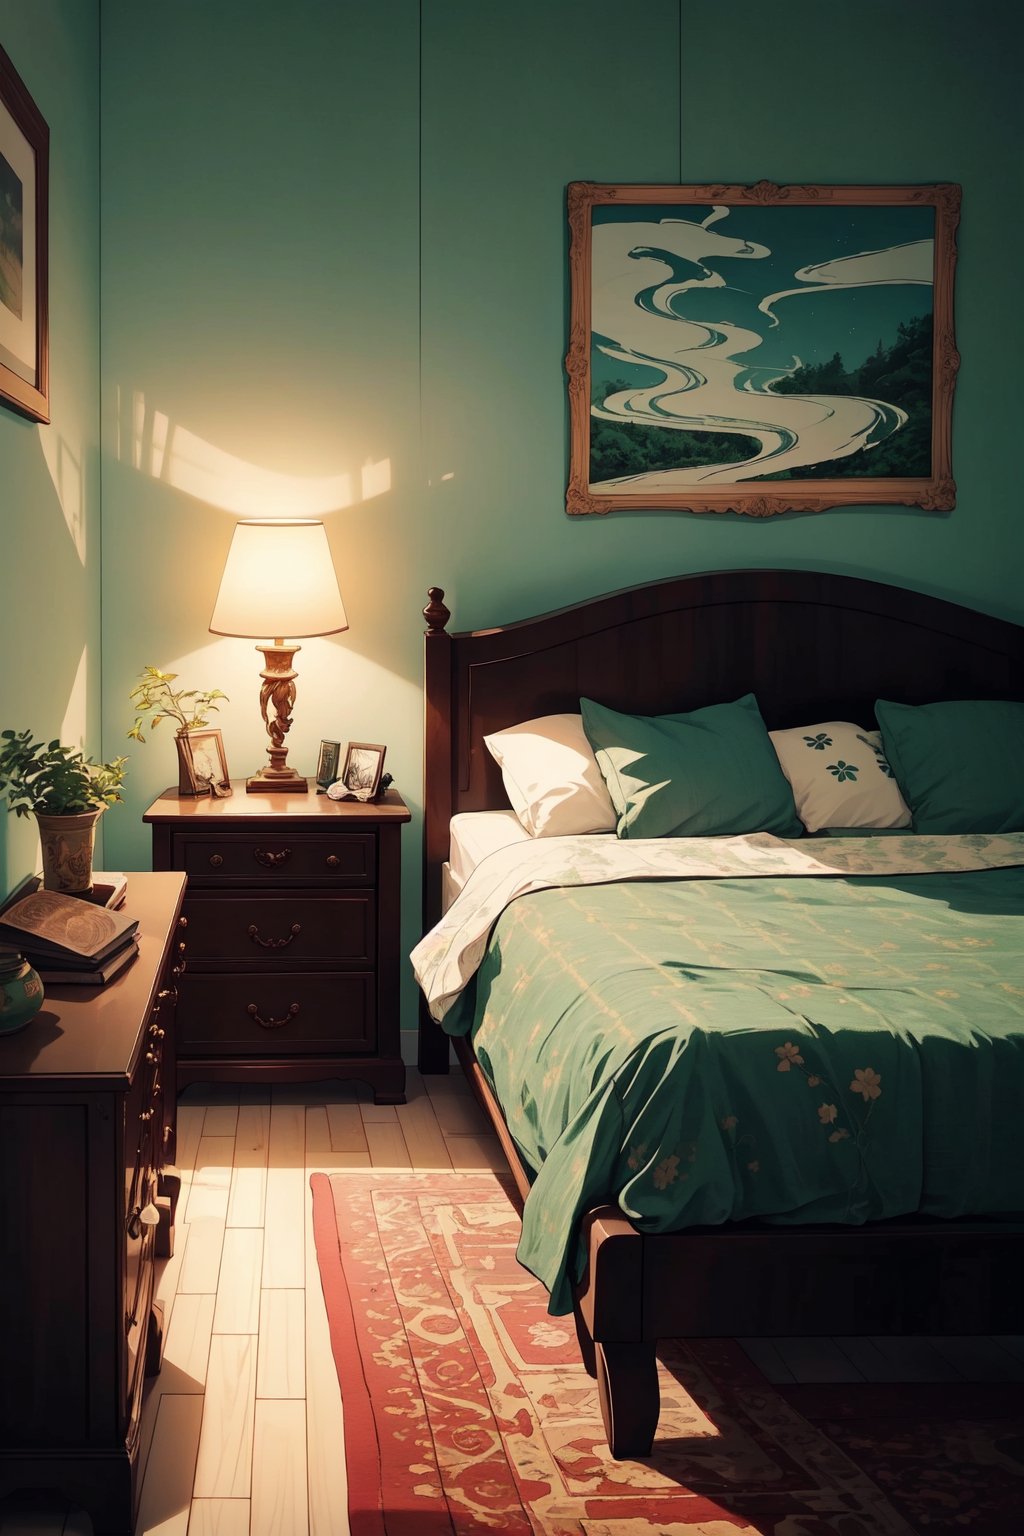 A bedroom with two bedside tables, each with a unique lampshade. The lamp on the left has a lampshade made of recycled paper, with a swirly design in shades of blue and green. The lamp on the right has a lampshade made of bamboo, with a delicate laser-cut pattern of flowers and leaves. The bedroom is lit by the soft glow of the two lamps, and the atmosphere is one of unique style and personality.